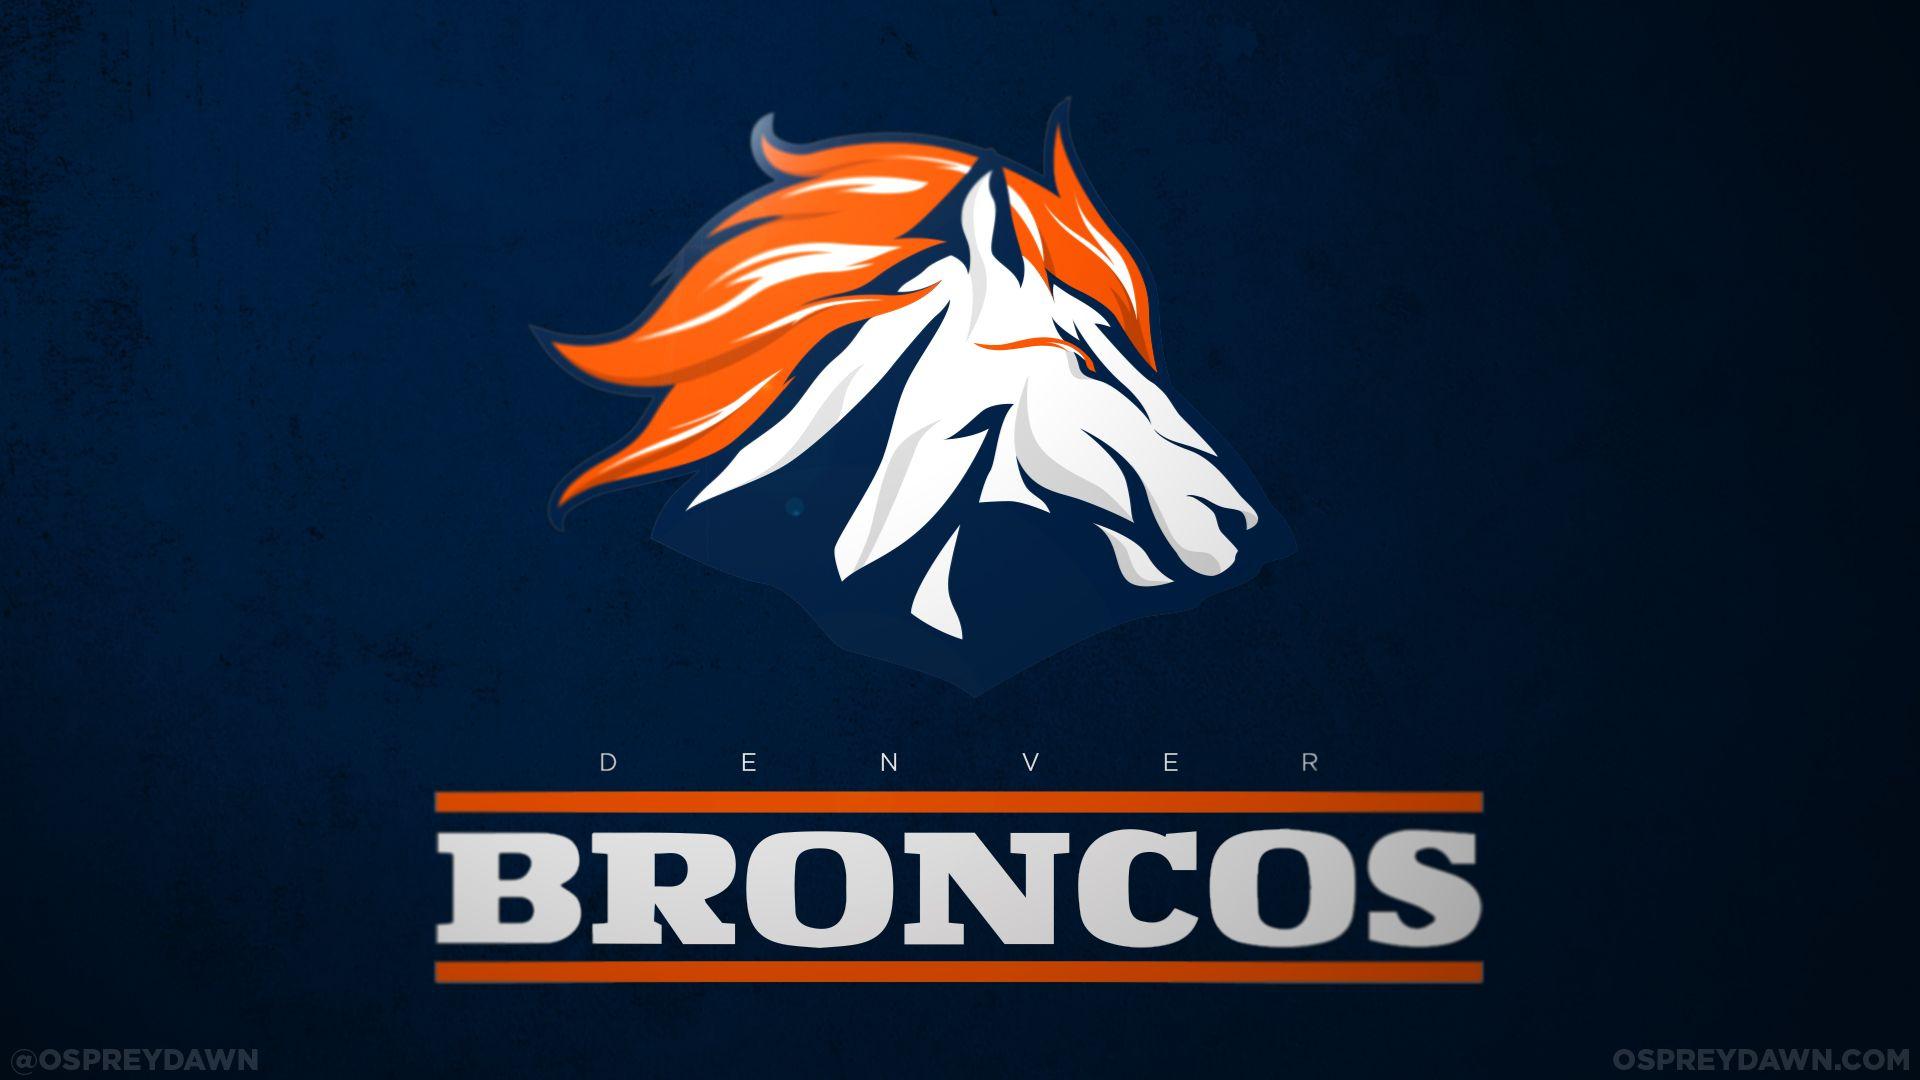 Neon Broncos Logo - New Uniforms coming??? [Archive] Message Boards